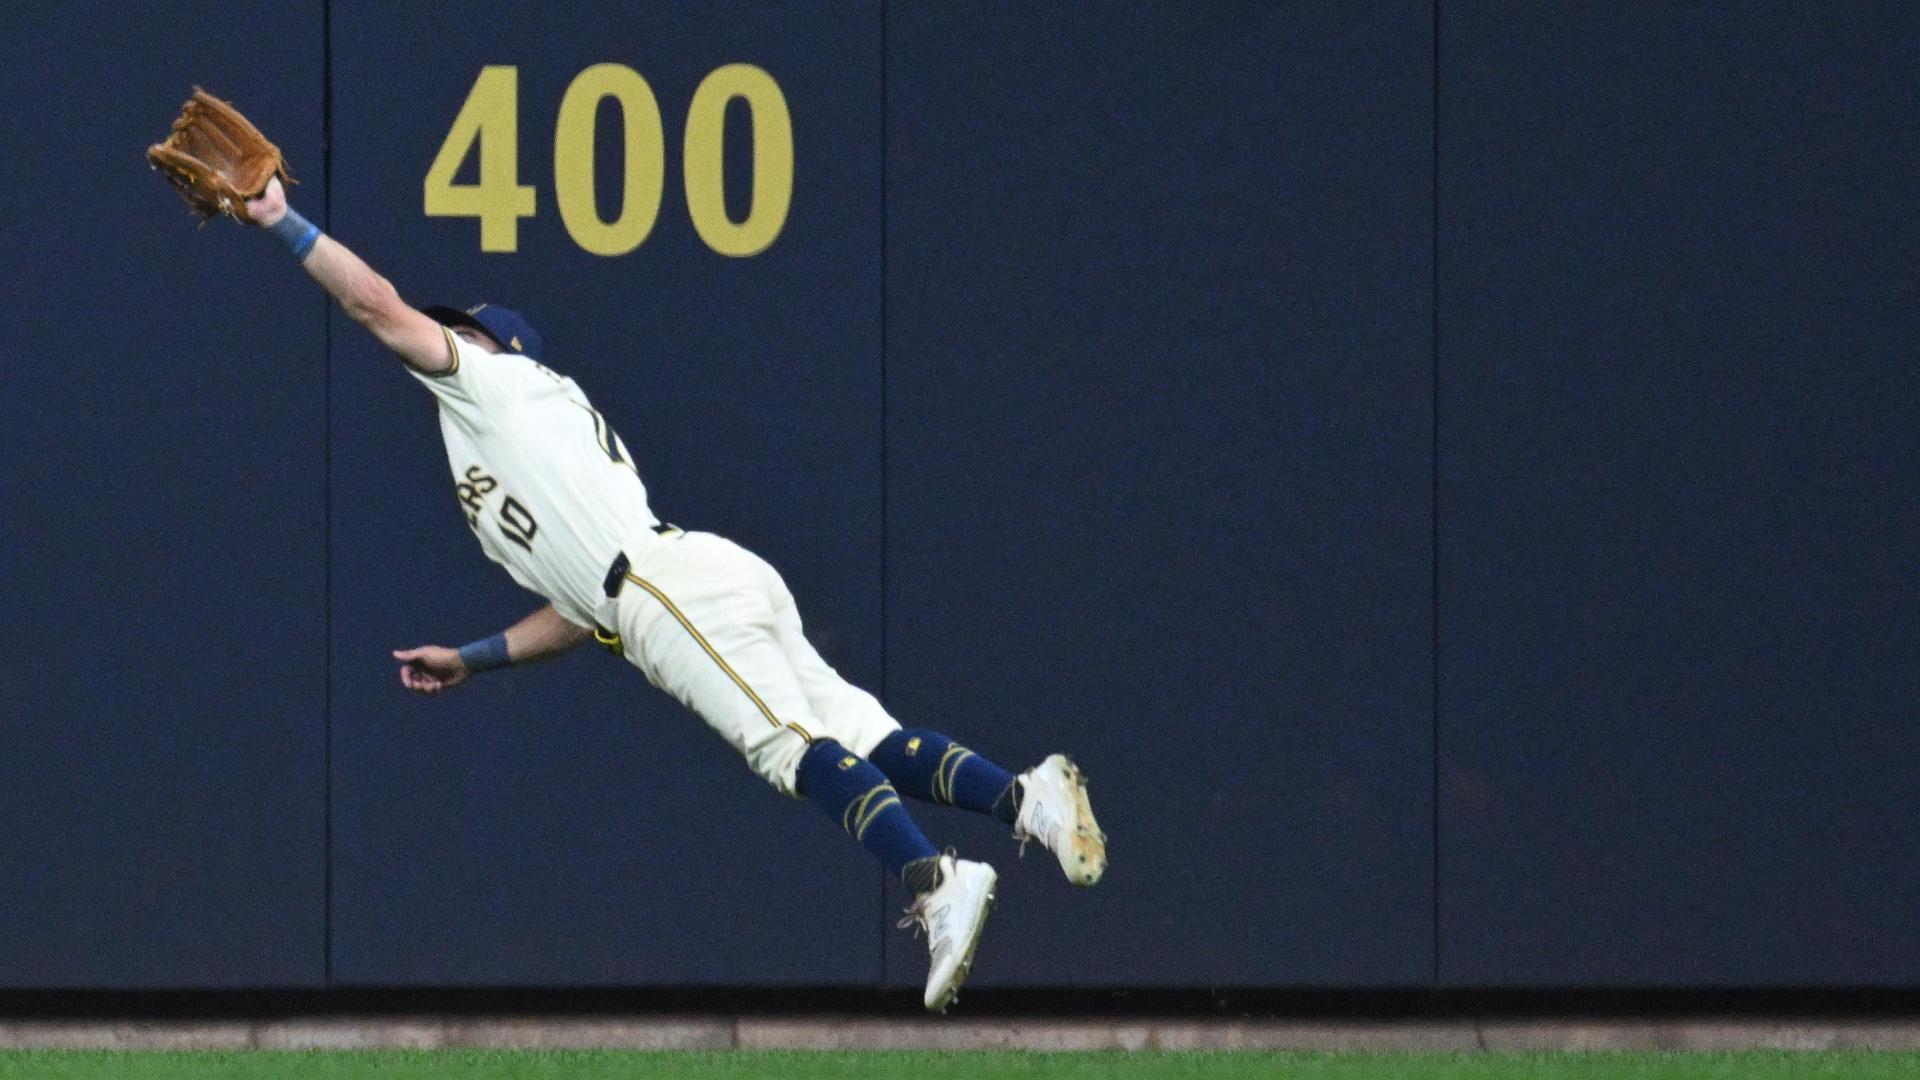 Sal Frelick shines at the plate and in the field as Brewers beat Pirates 4-3